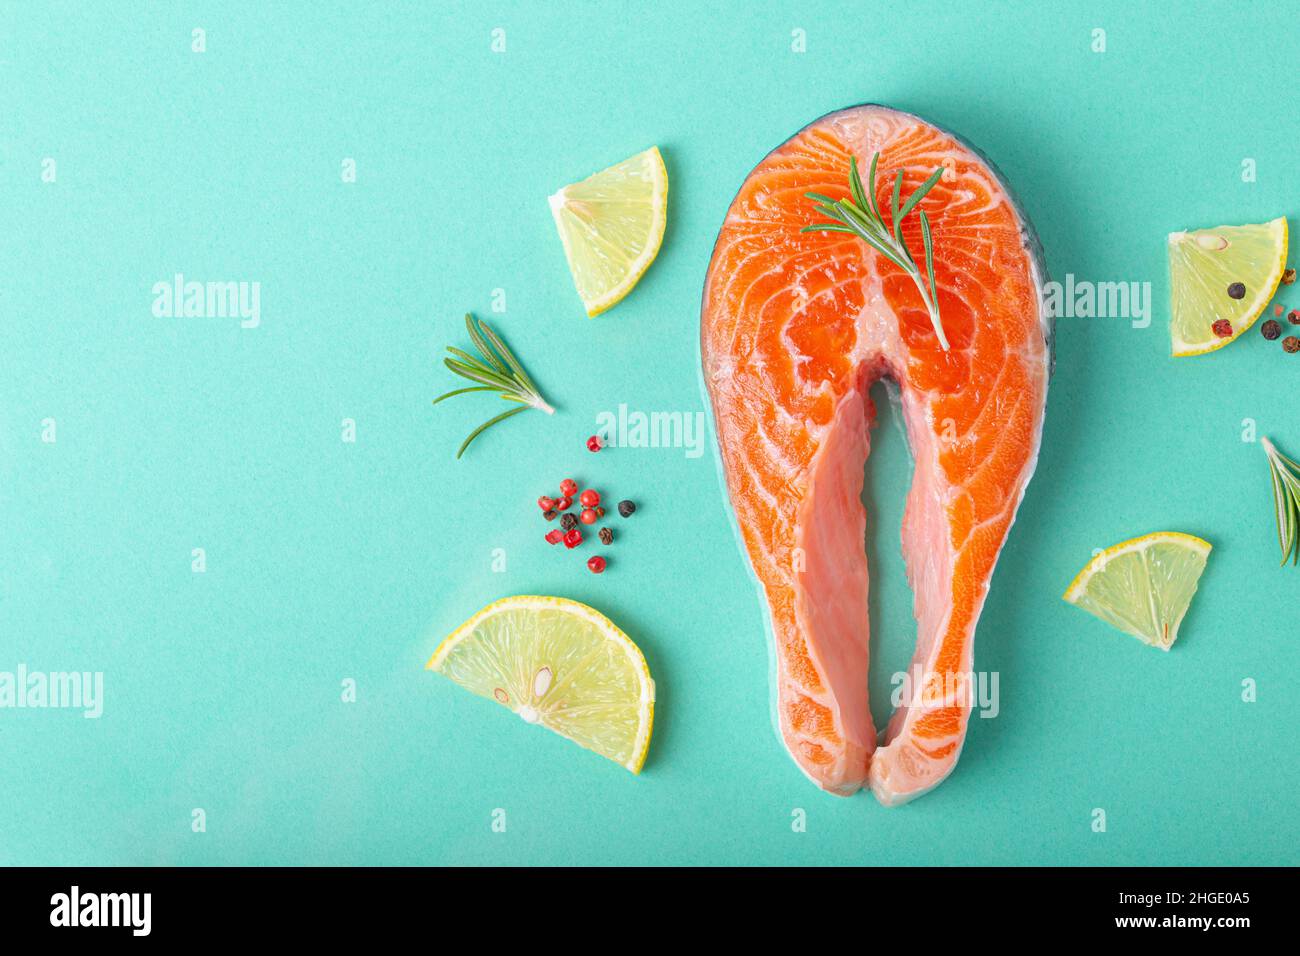 Raw fresh fish salmon steak top view on blue clean background from above Stock Photo